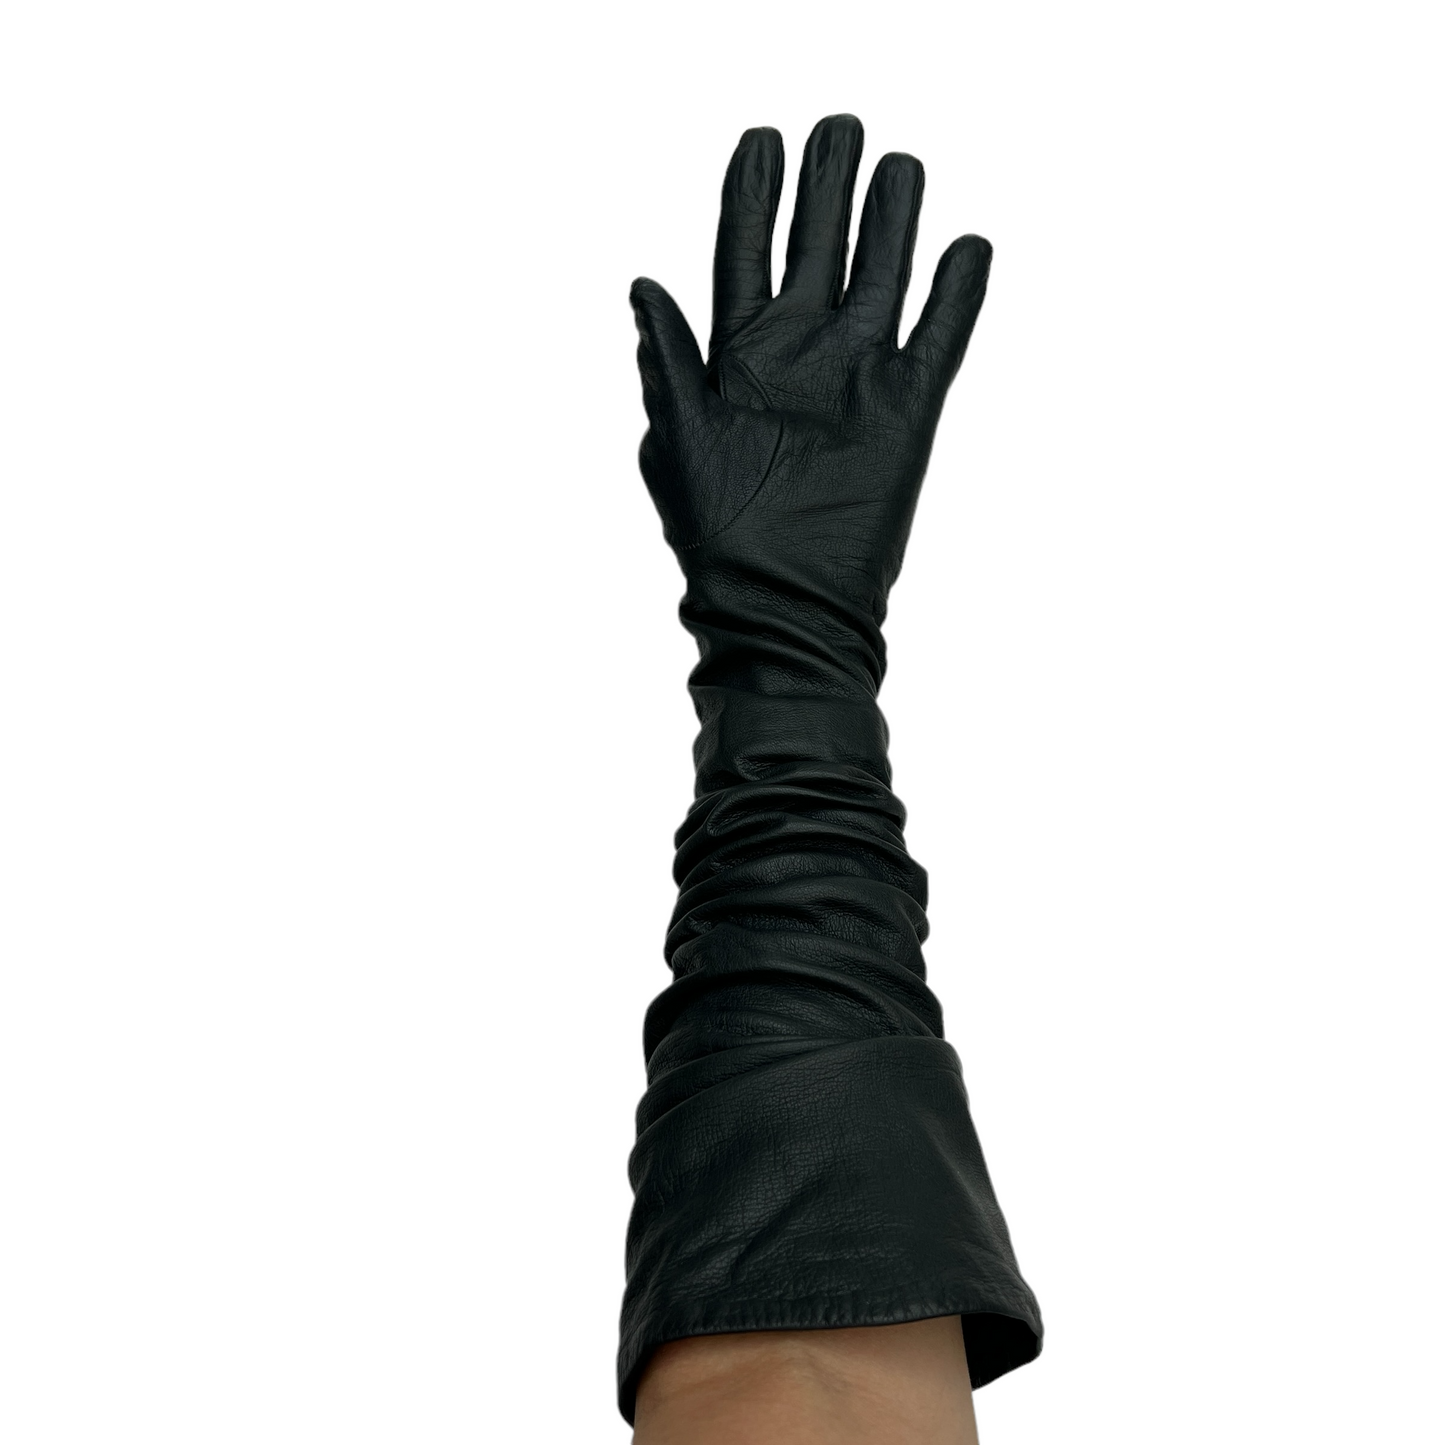 Long Leather Gloves - 7